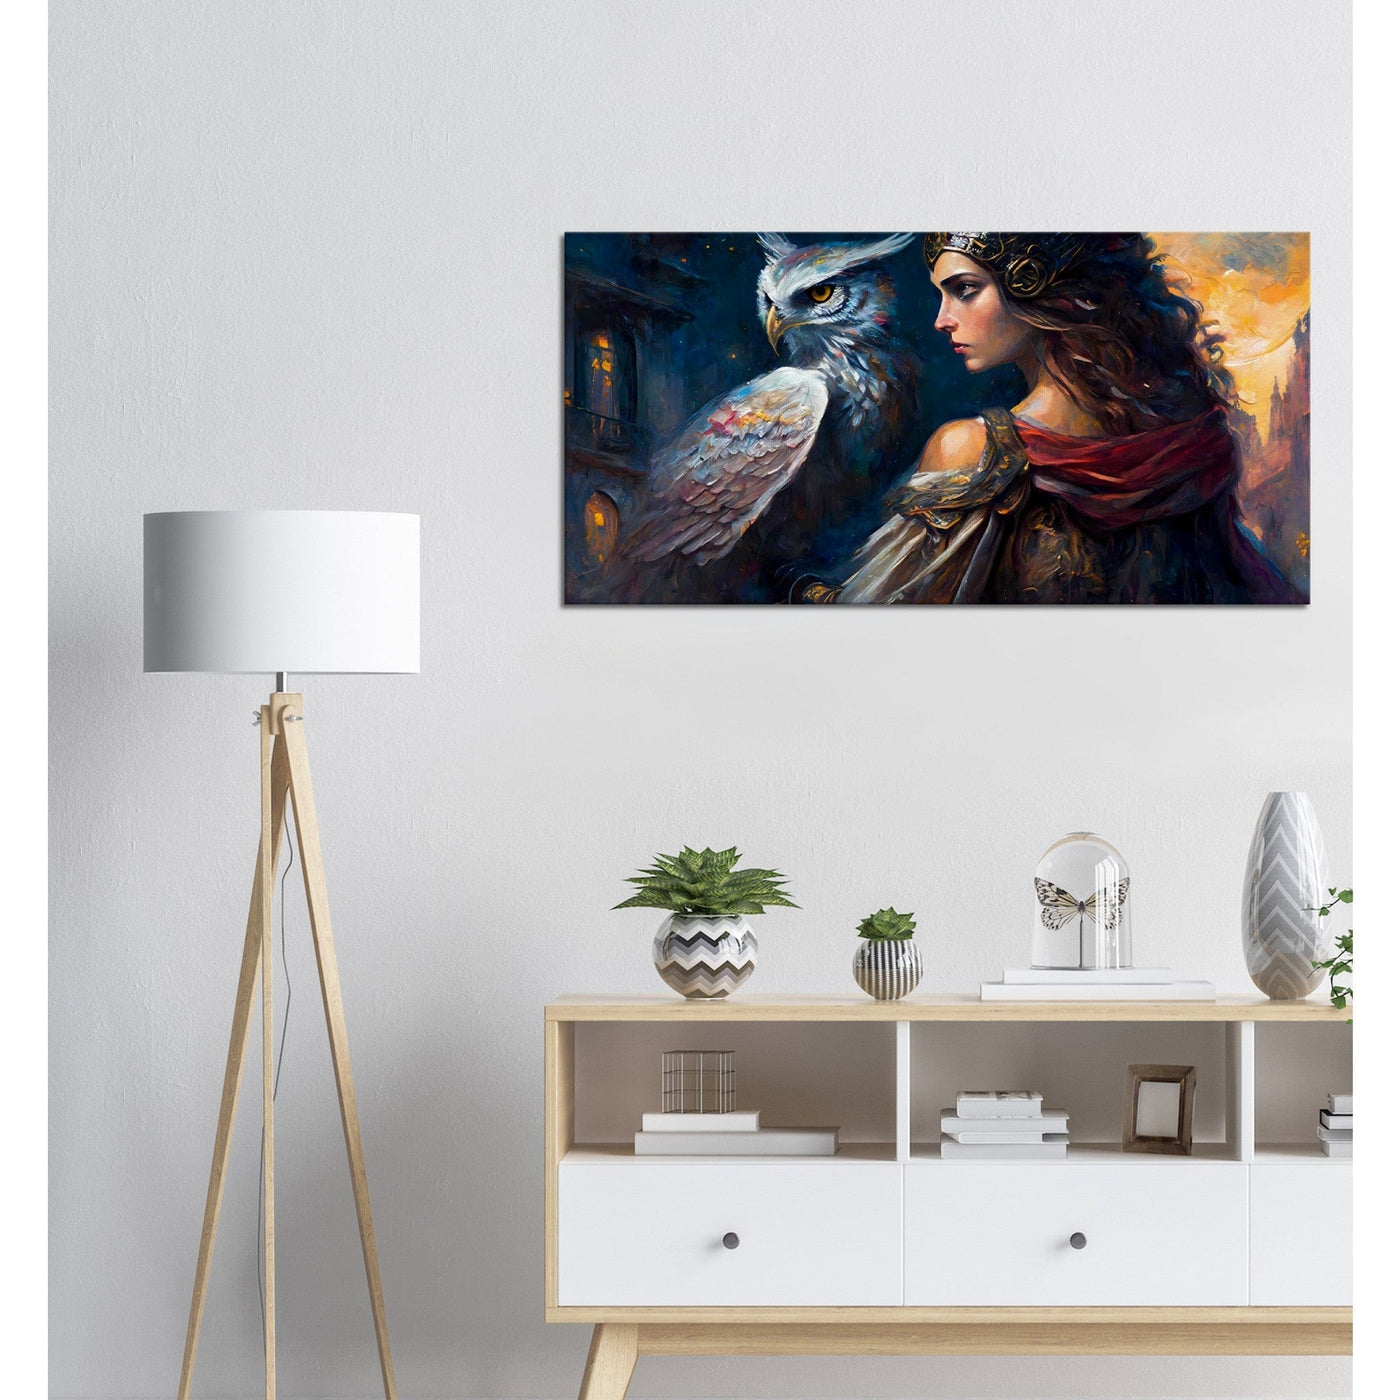 The Protector of the City: Athena and her Owl - Oil Painting Printed Canvas. 50X100.